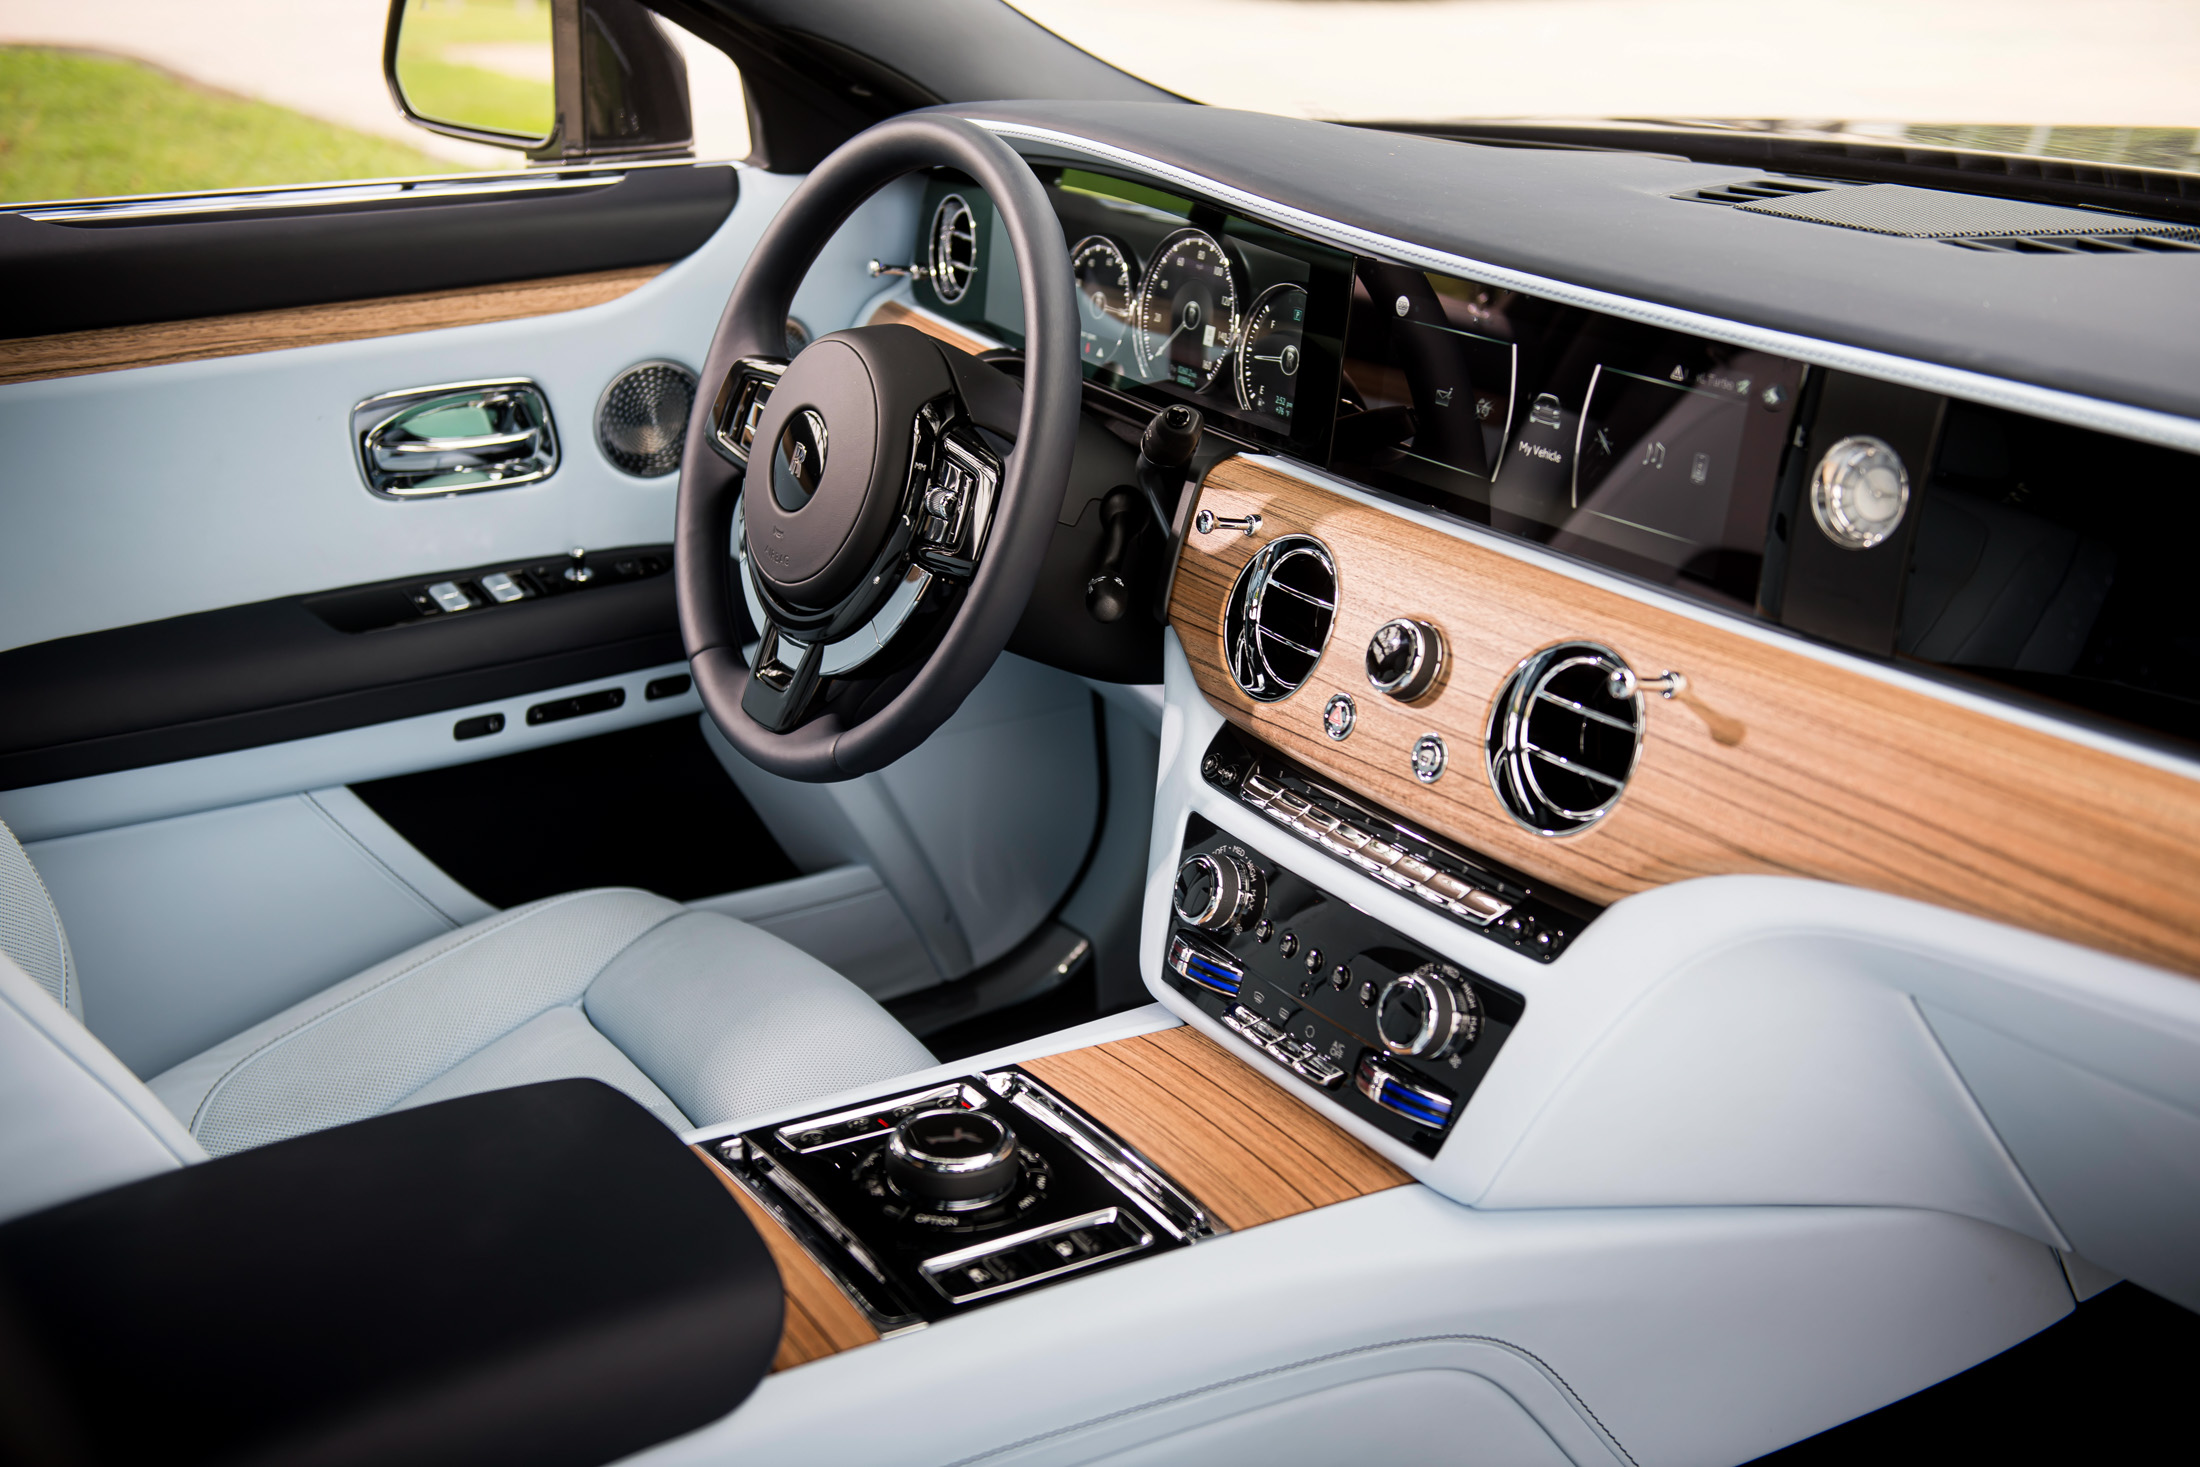 All-New 2021 Rolls-Royce Ghost Gets More Tech, Less Ostentatious Design